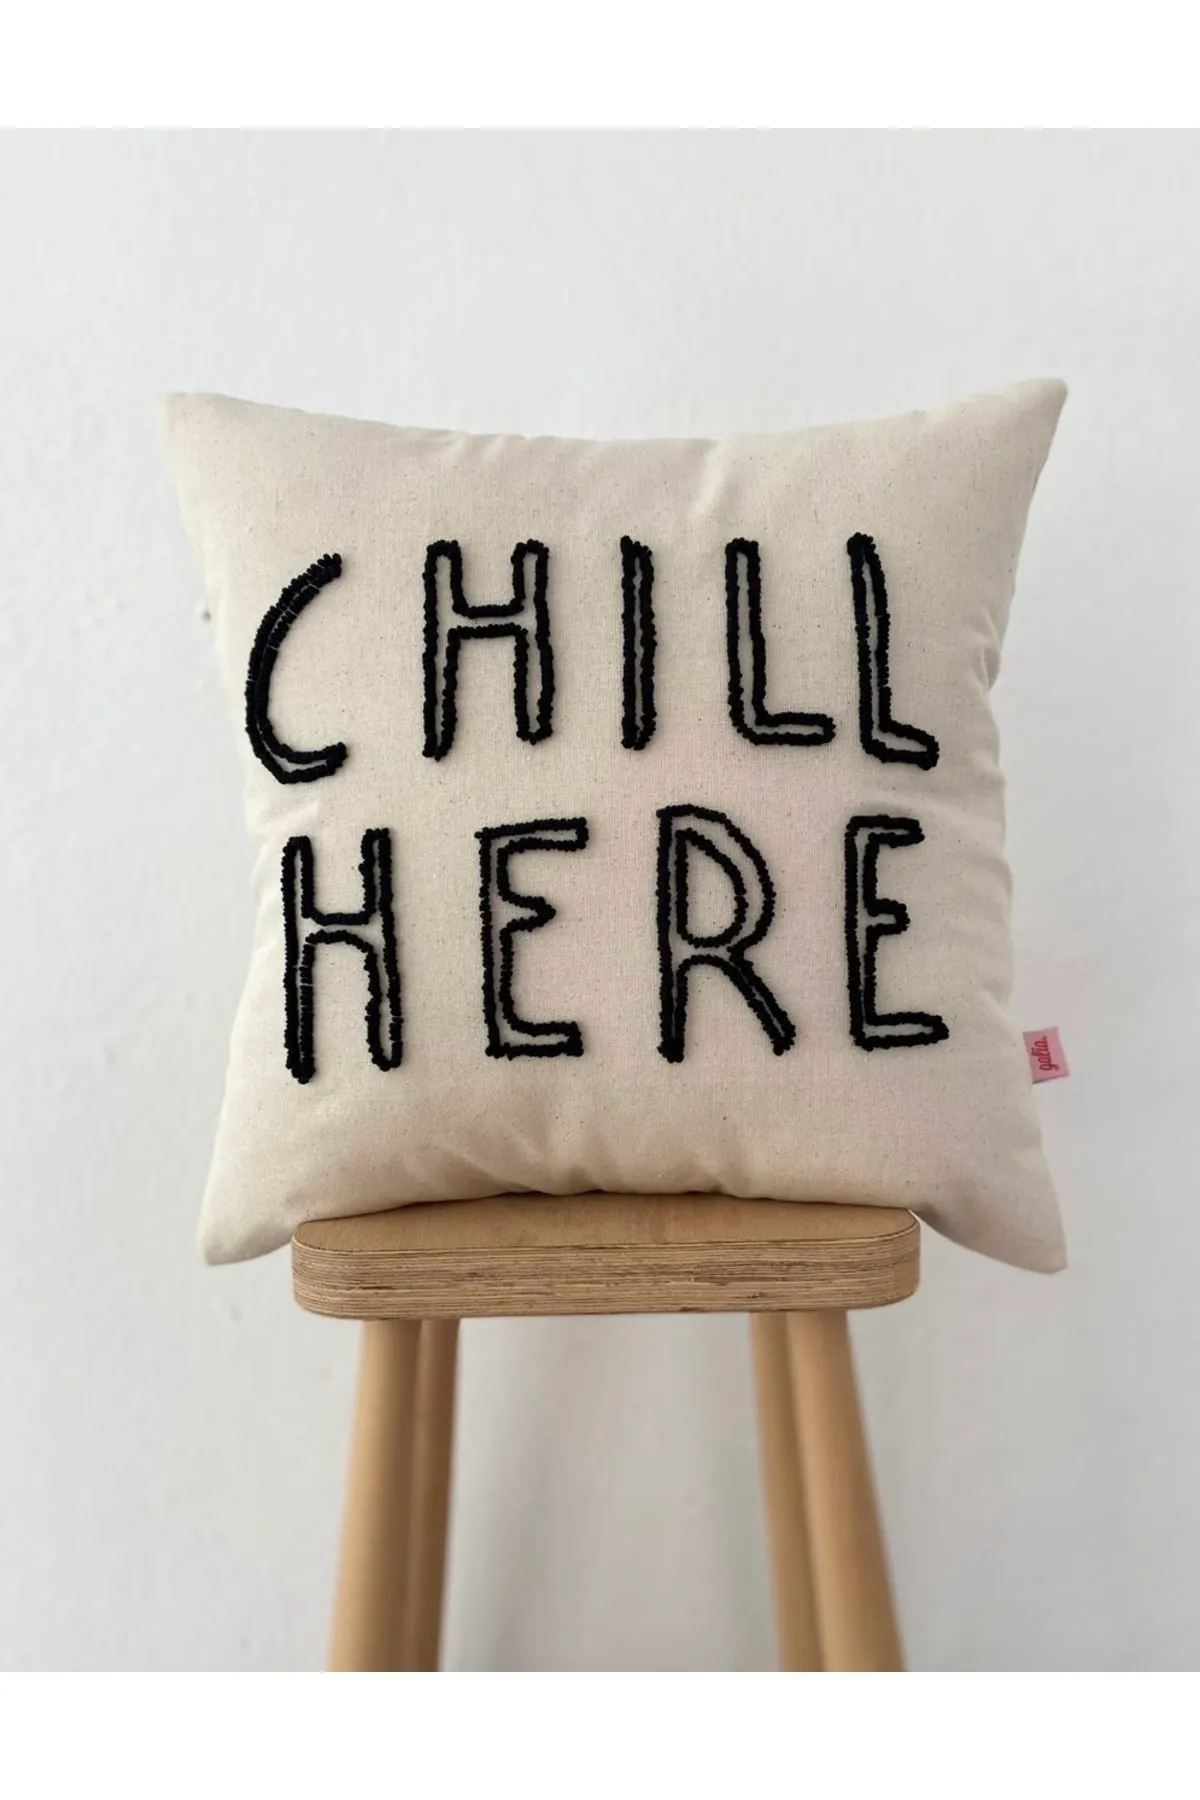 Chill Here Washed Linen Motto Punch Cushion Pillow Cover